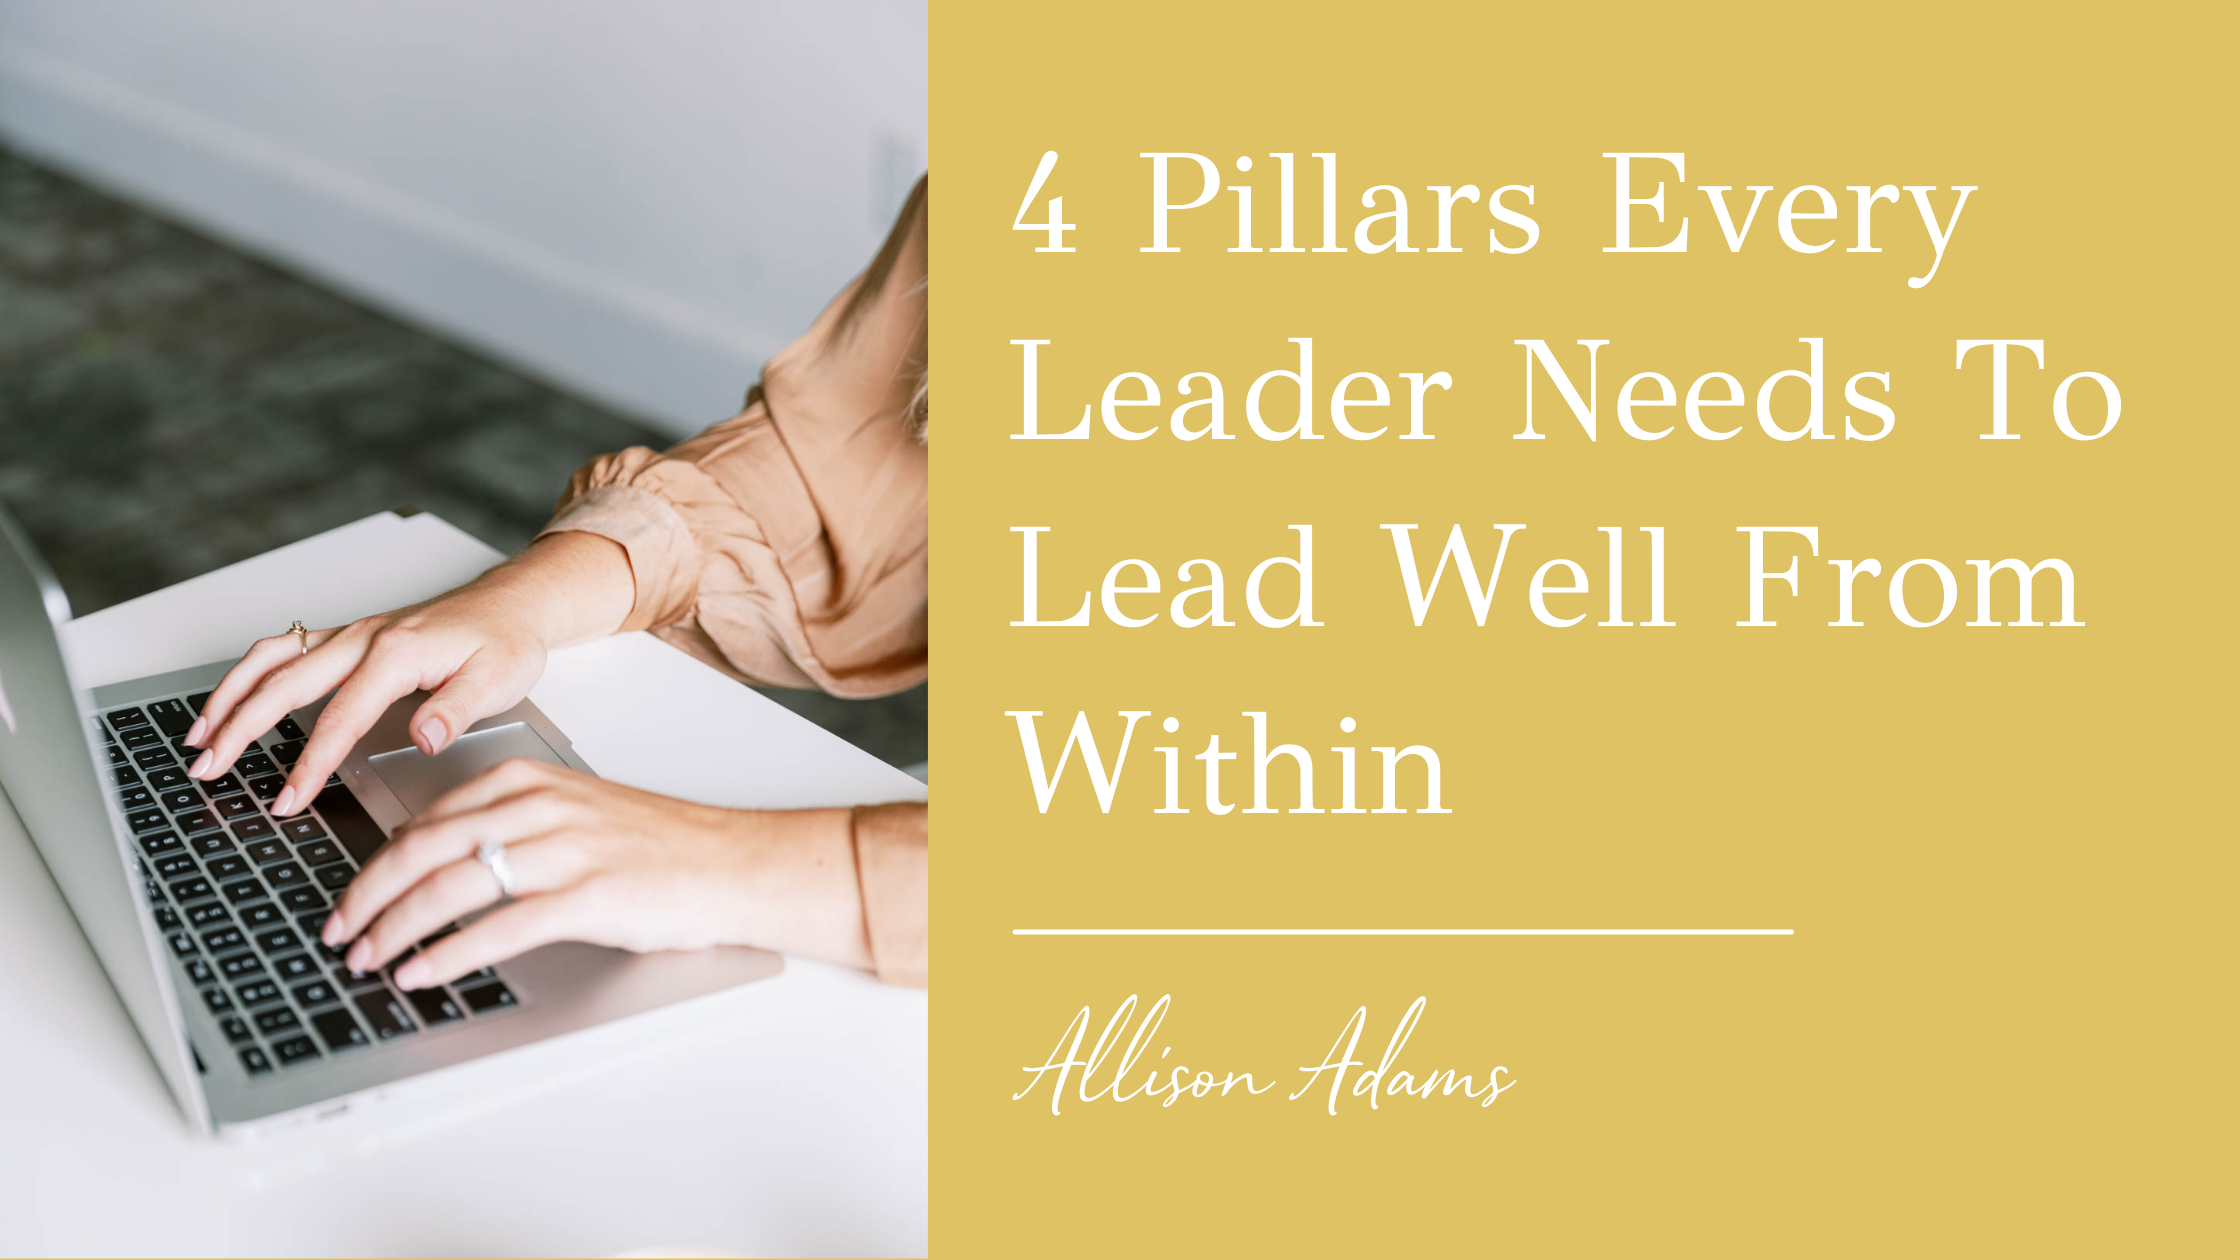 4 Pillars Every Leader Needs To Lead Well From Within